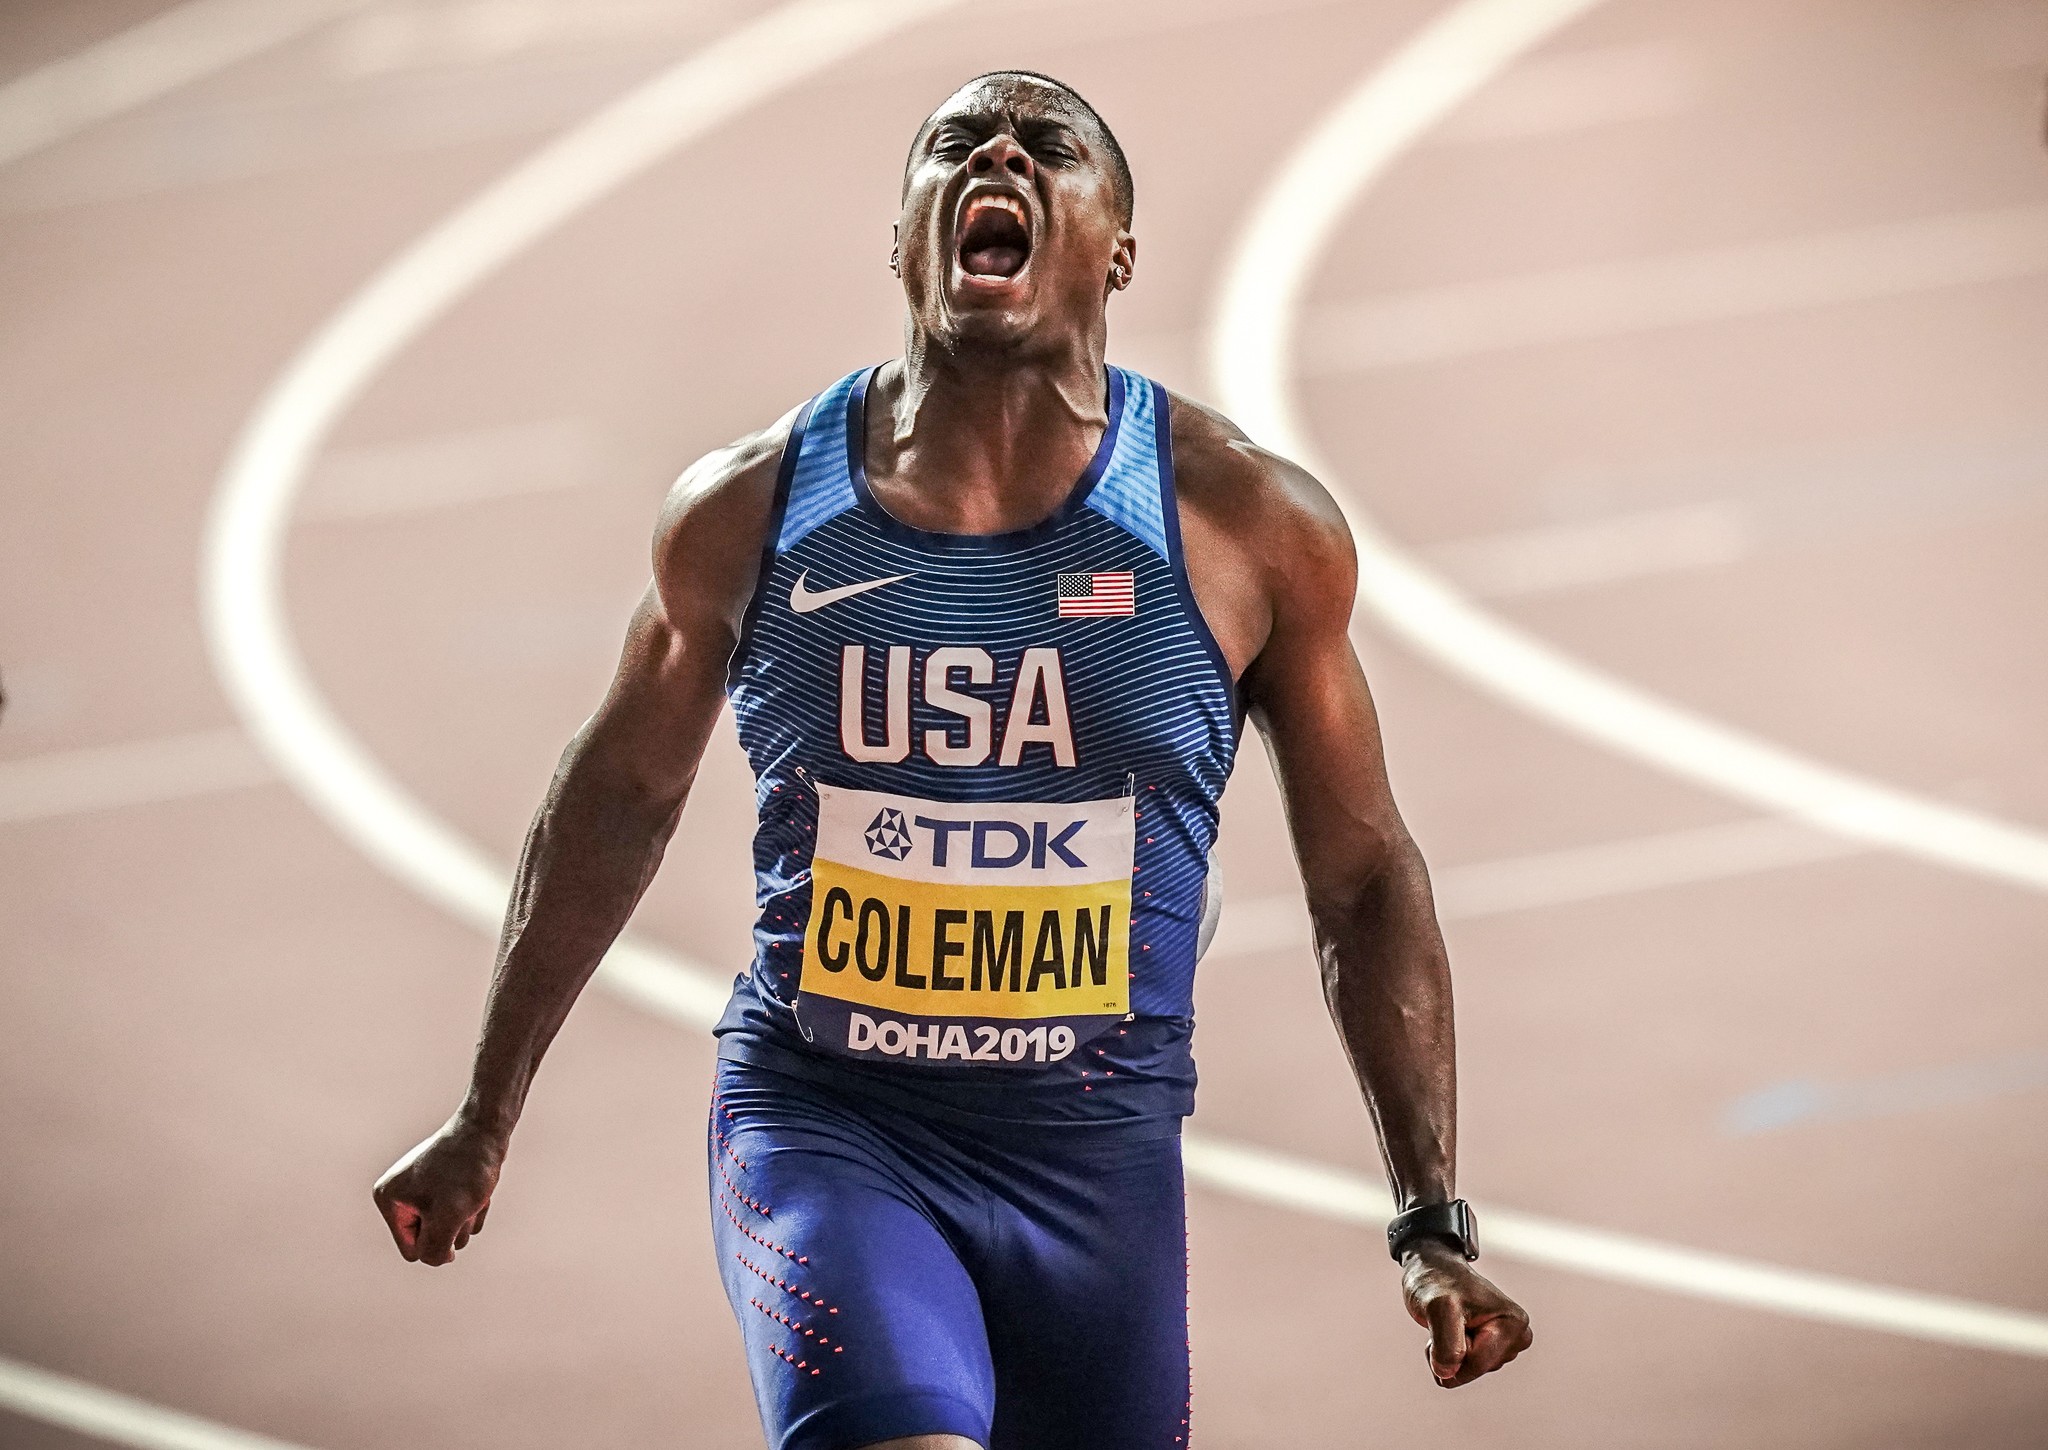 Christian Coleman celebrates victory in the 100m final at the 2019 IAAF World Athletics Championships. Photo: DPA